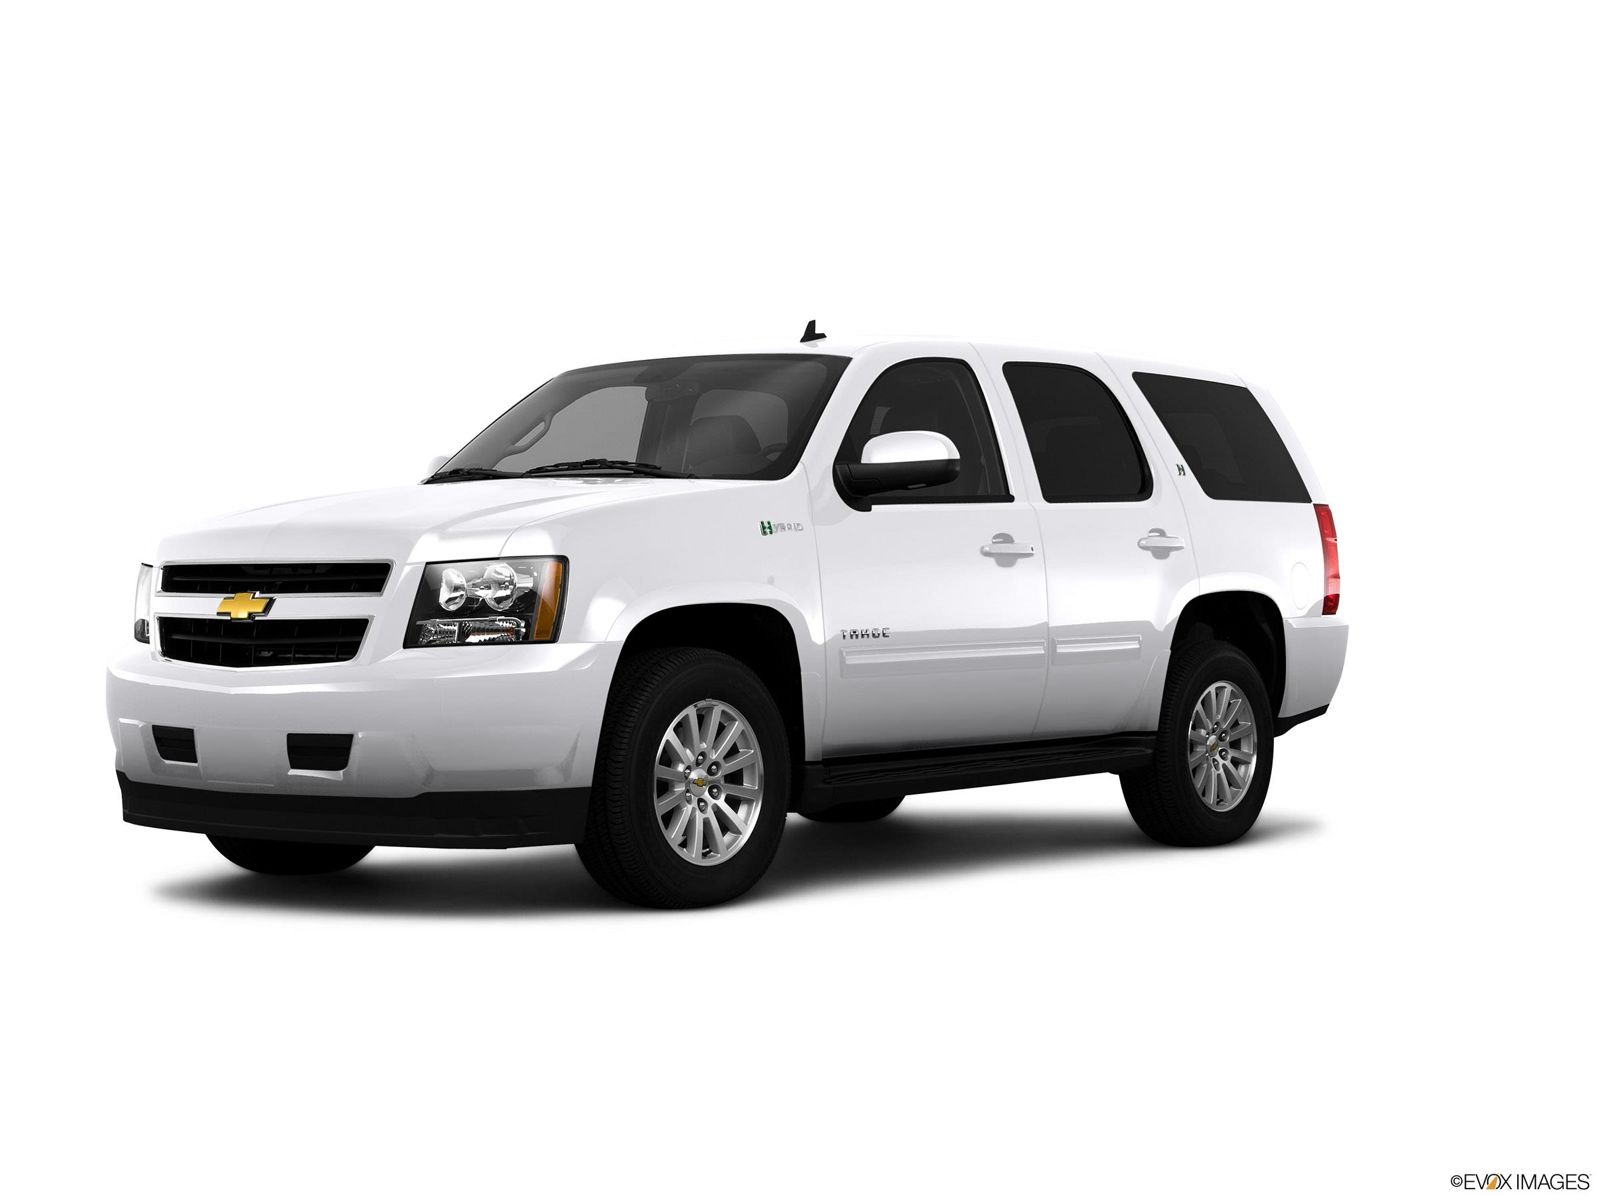 2010 Chevrolet Tahoe Hybrid Research, Photos, Specs and Expertise | CarMax